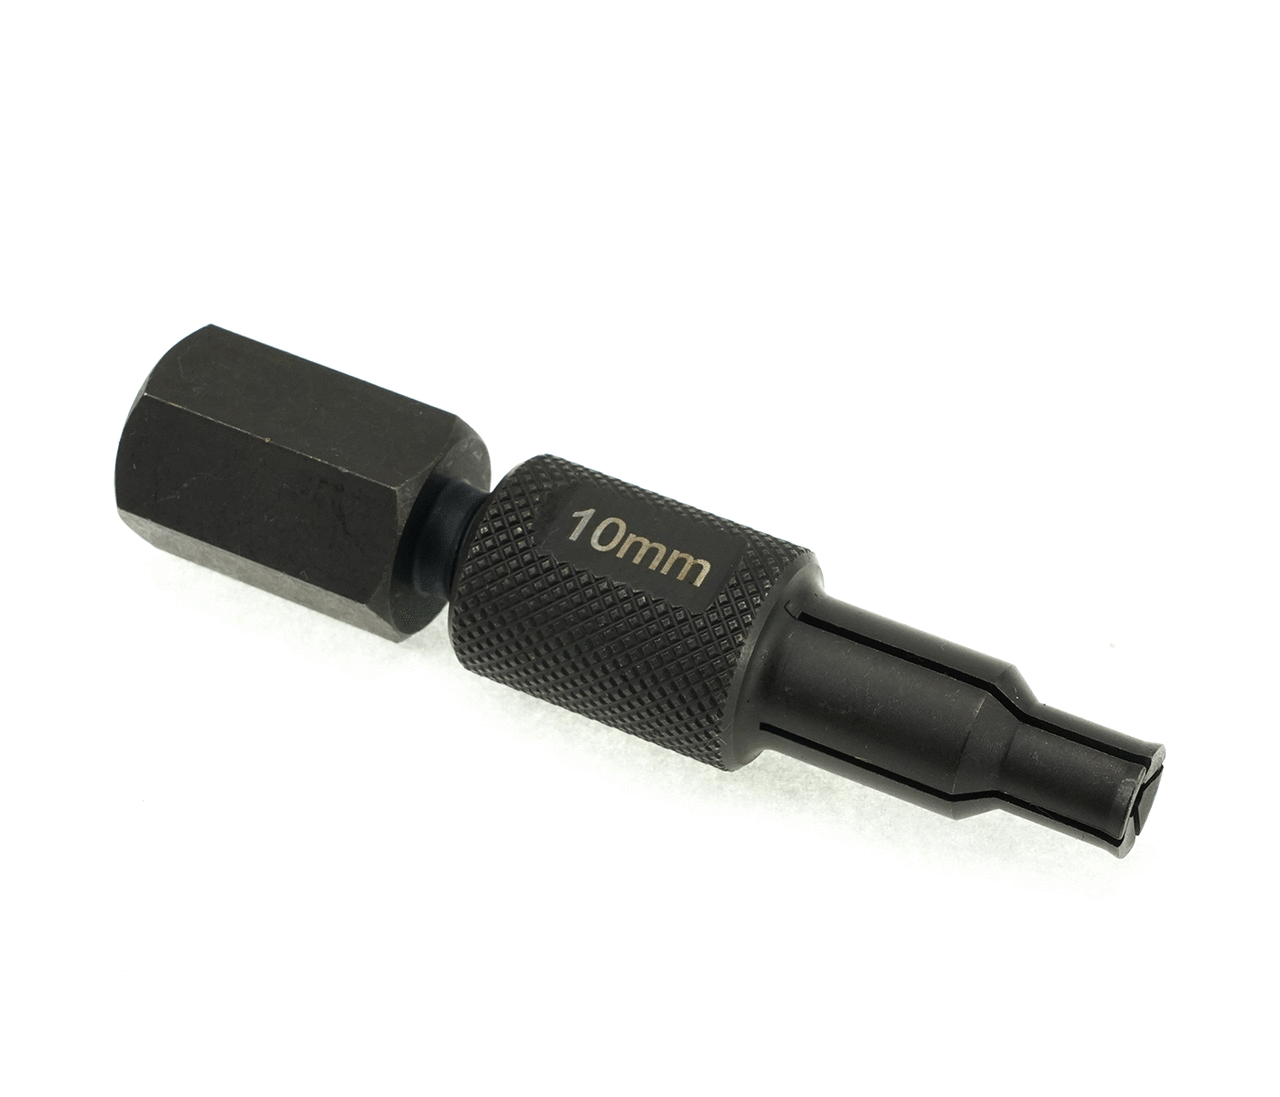 Enduro Puller 10-12mm - Black Oxide, Expanding Collet, Bearing Puller for bearings with 10-12mm IDs